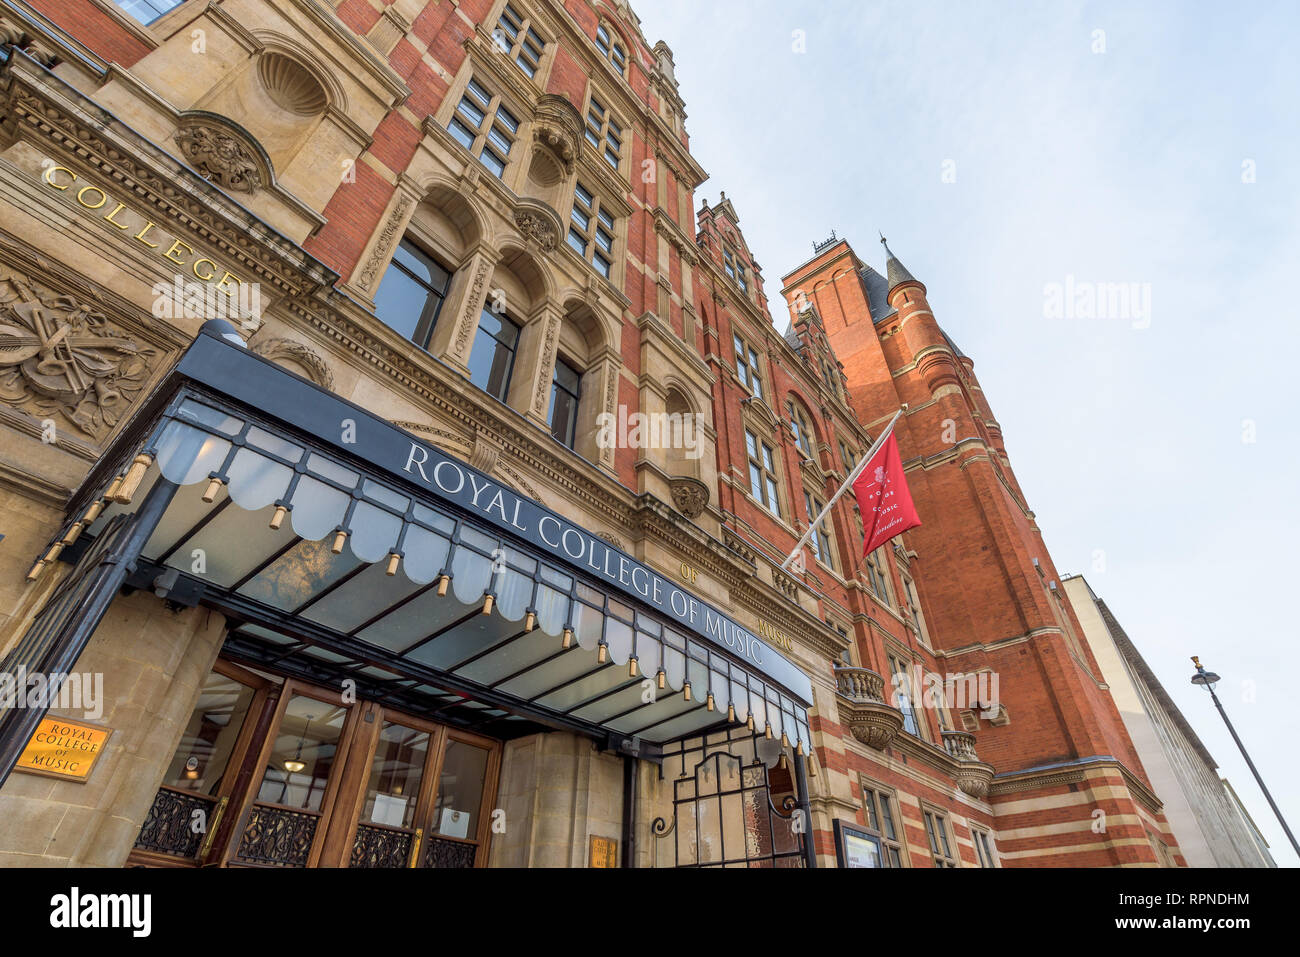 The Royal College of Music, a distinguished music conservatory with a concert hall and museum near the Royal Albert Hall in South Kensington, London Stock Photo